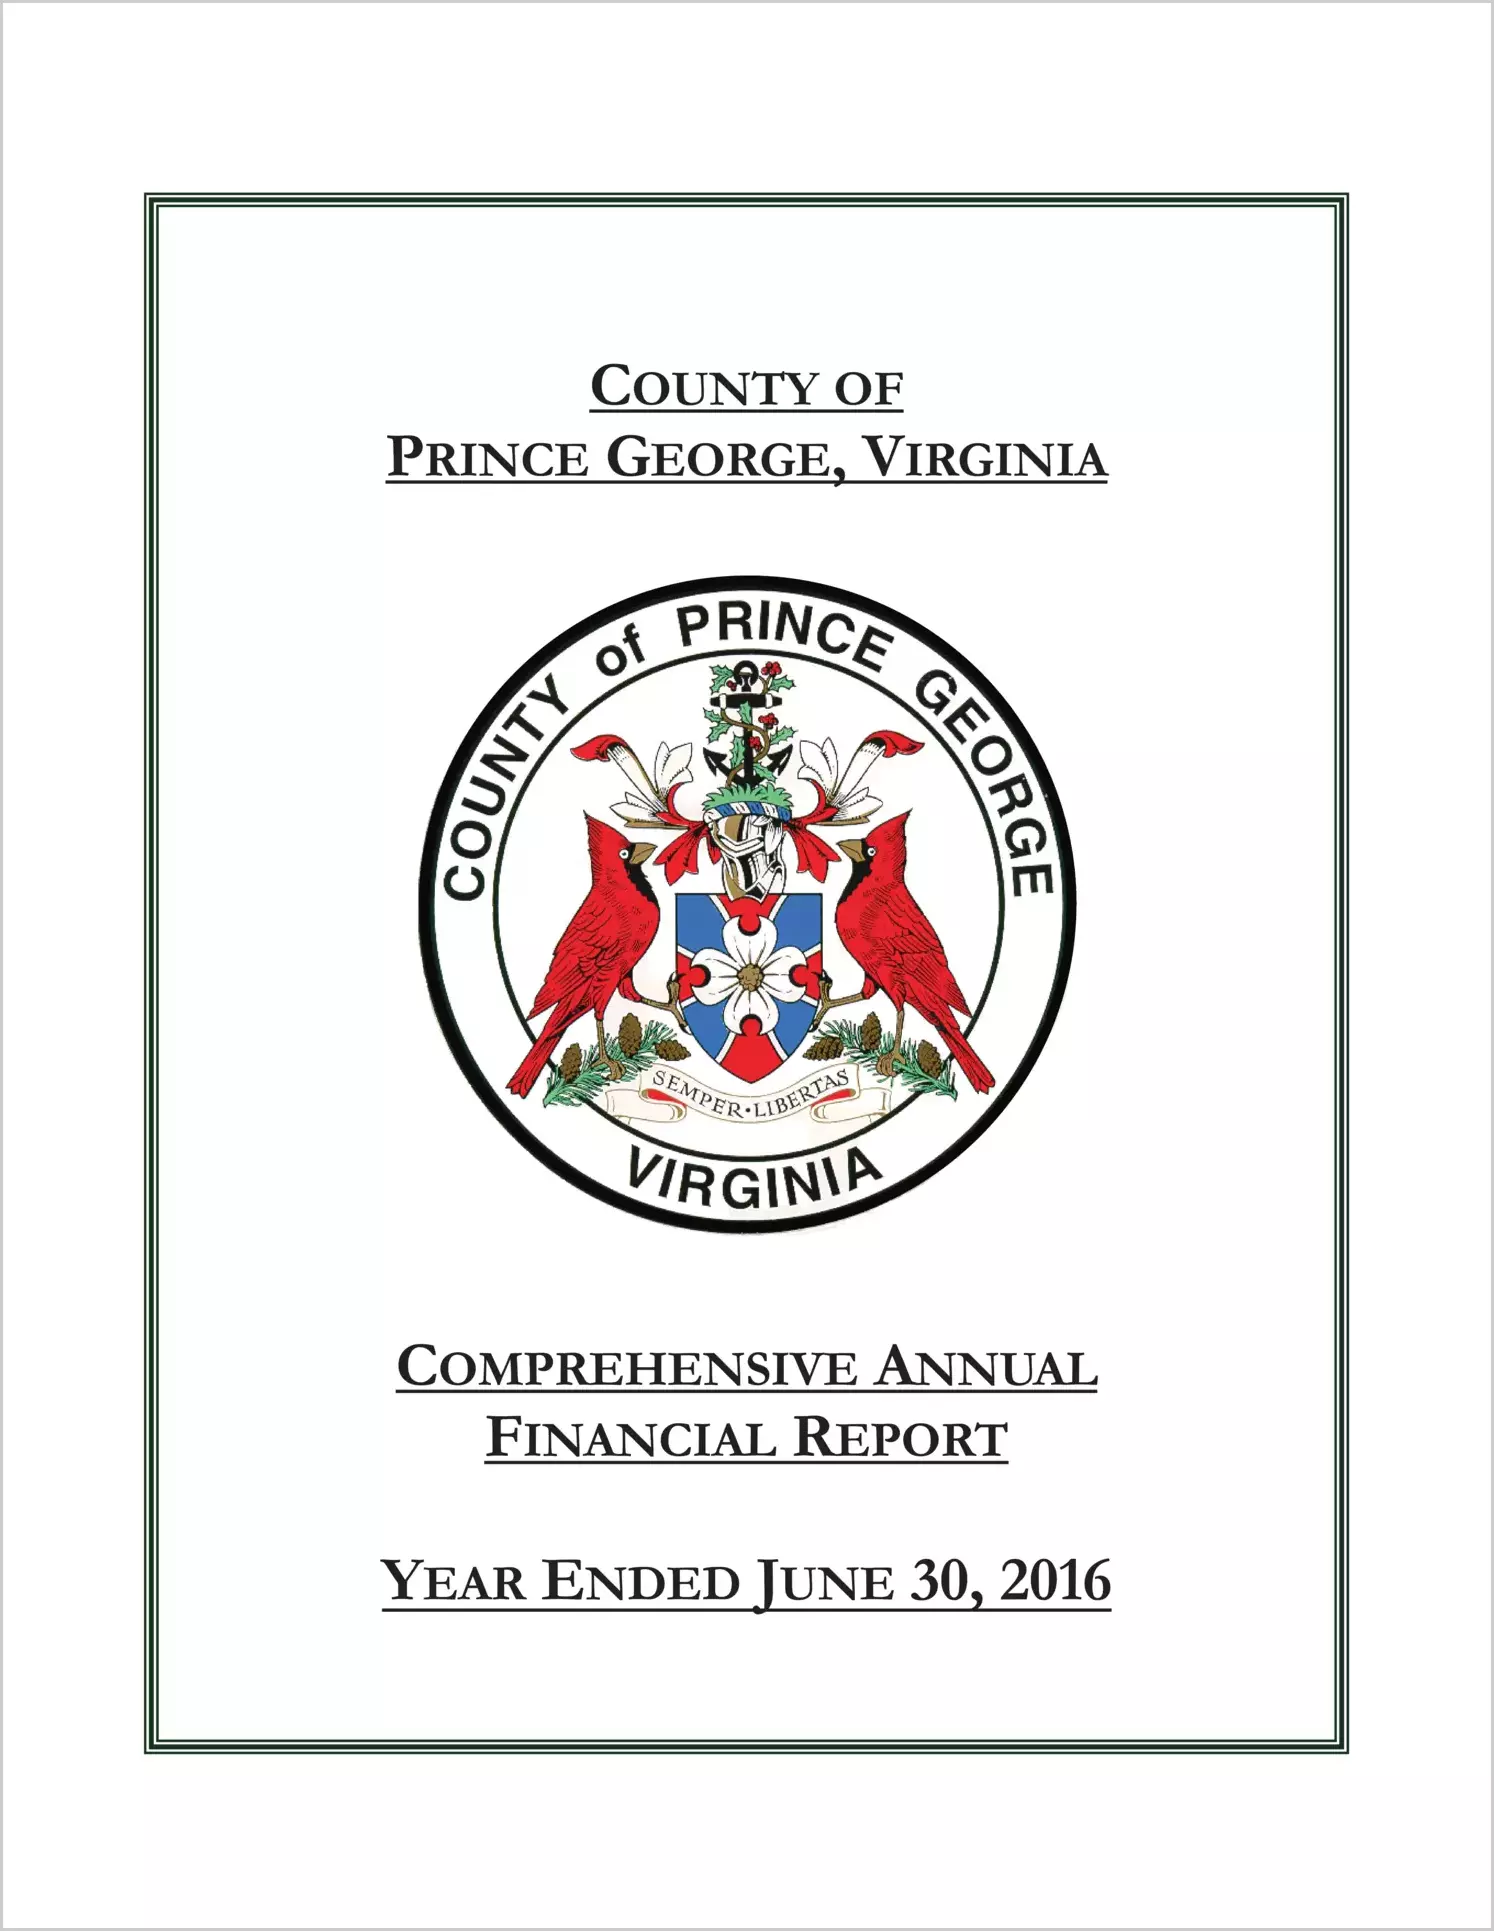 2016 Annual Financial Report for County of Prince George